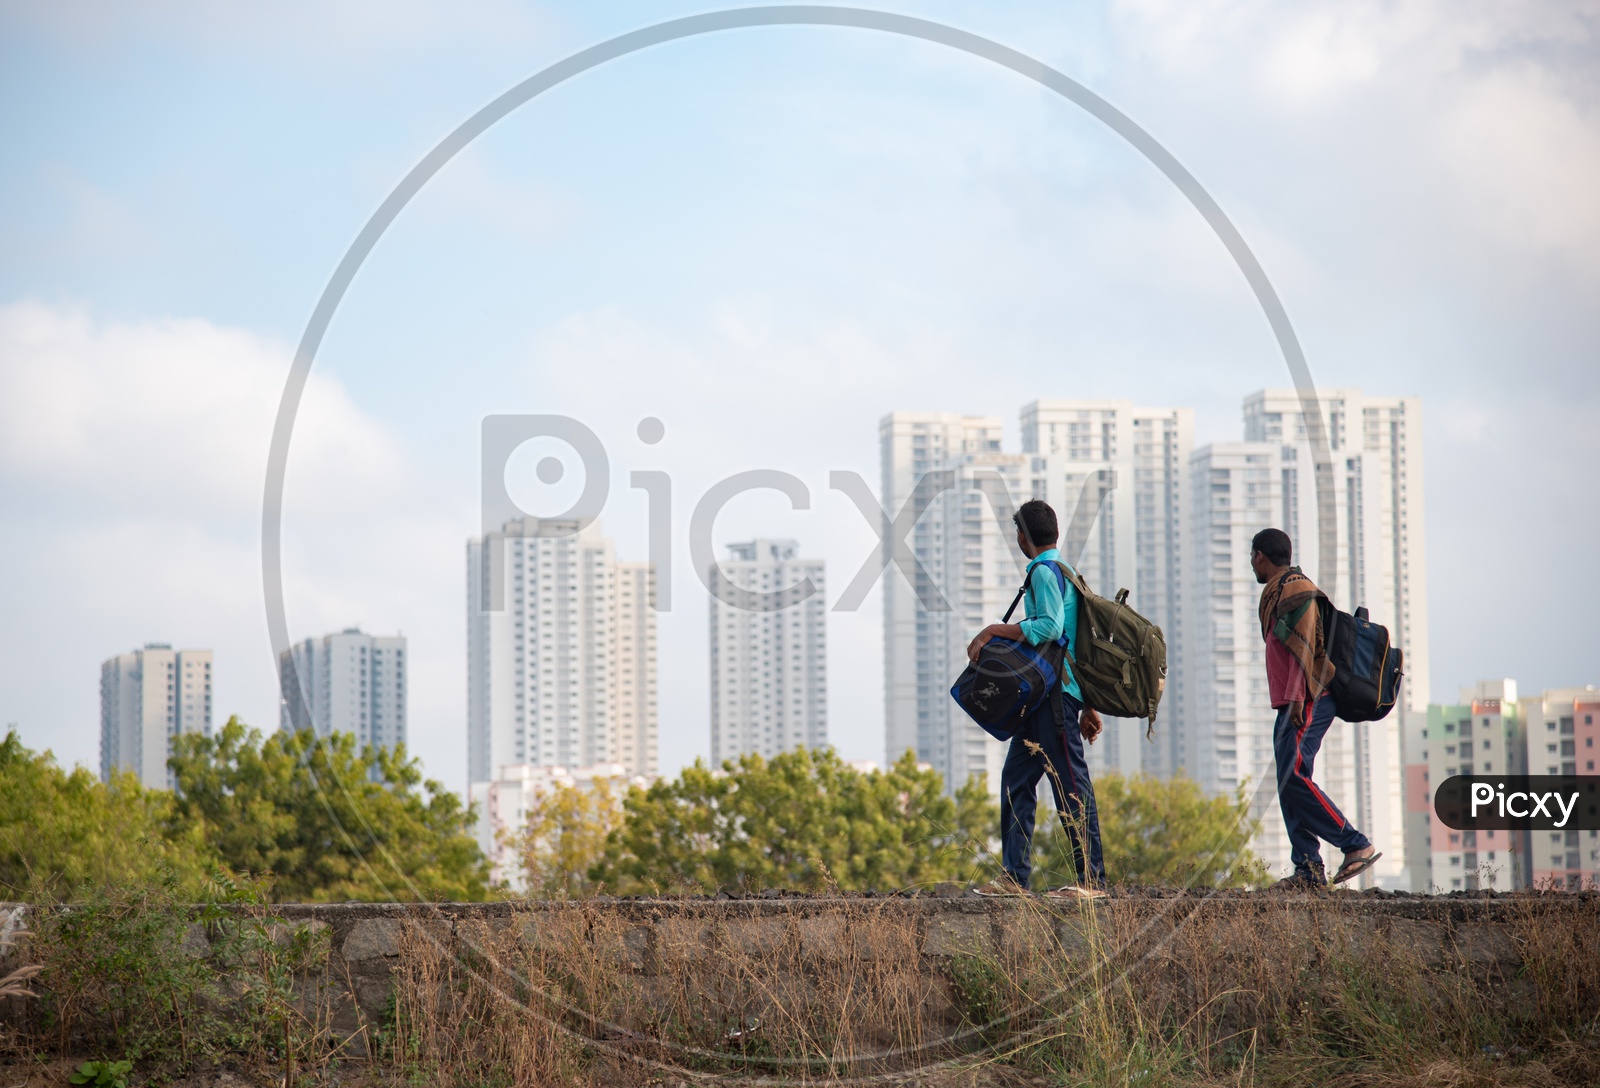 two construction workers walk on a small wall across Railway tracks near MMTS, Hitech City station